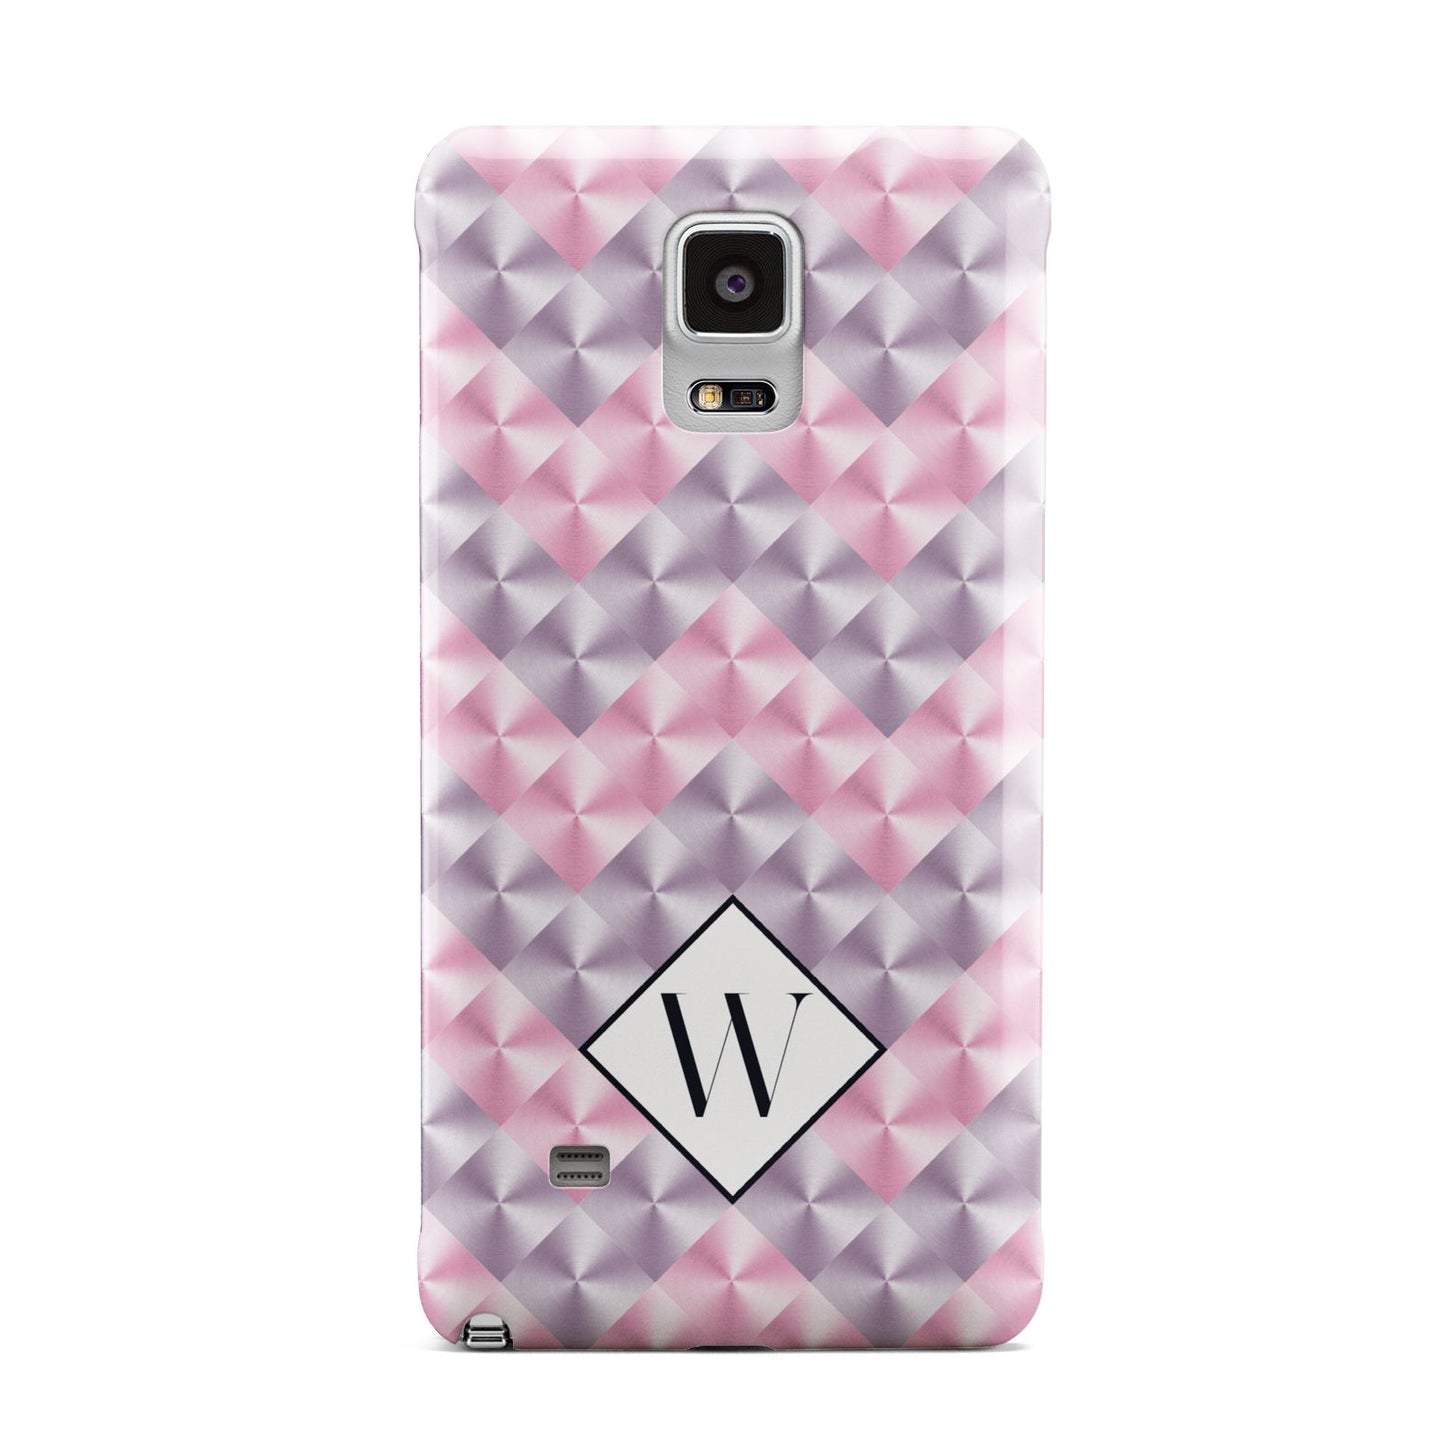 Personalised Mother Of Pearl Monogram Letter Samsung Galaxy Note 4 Case